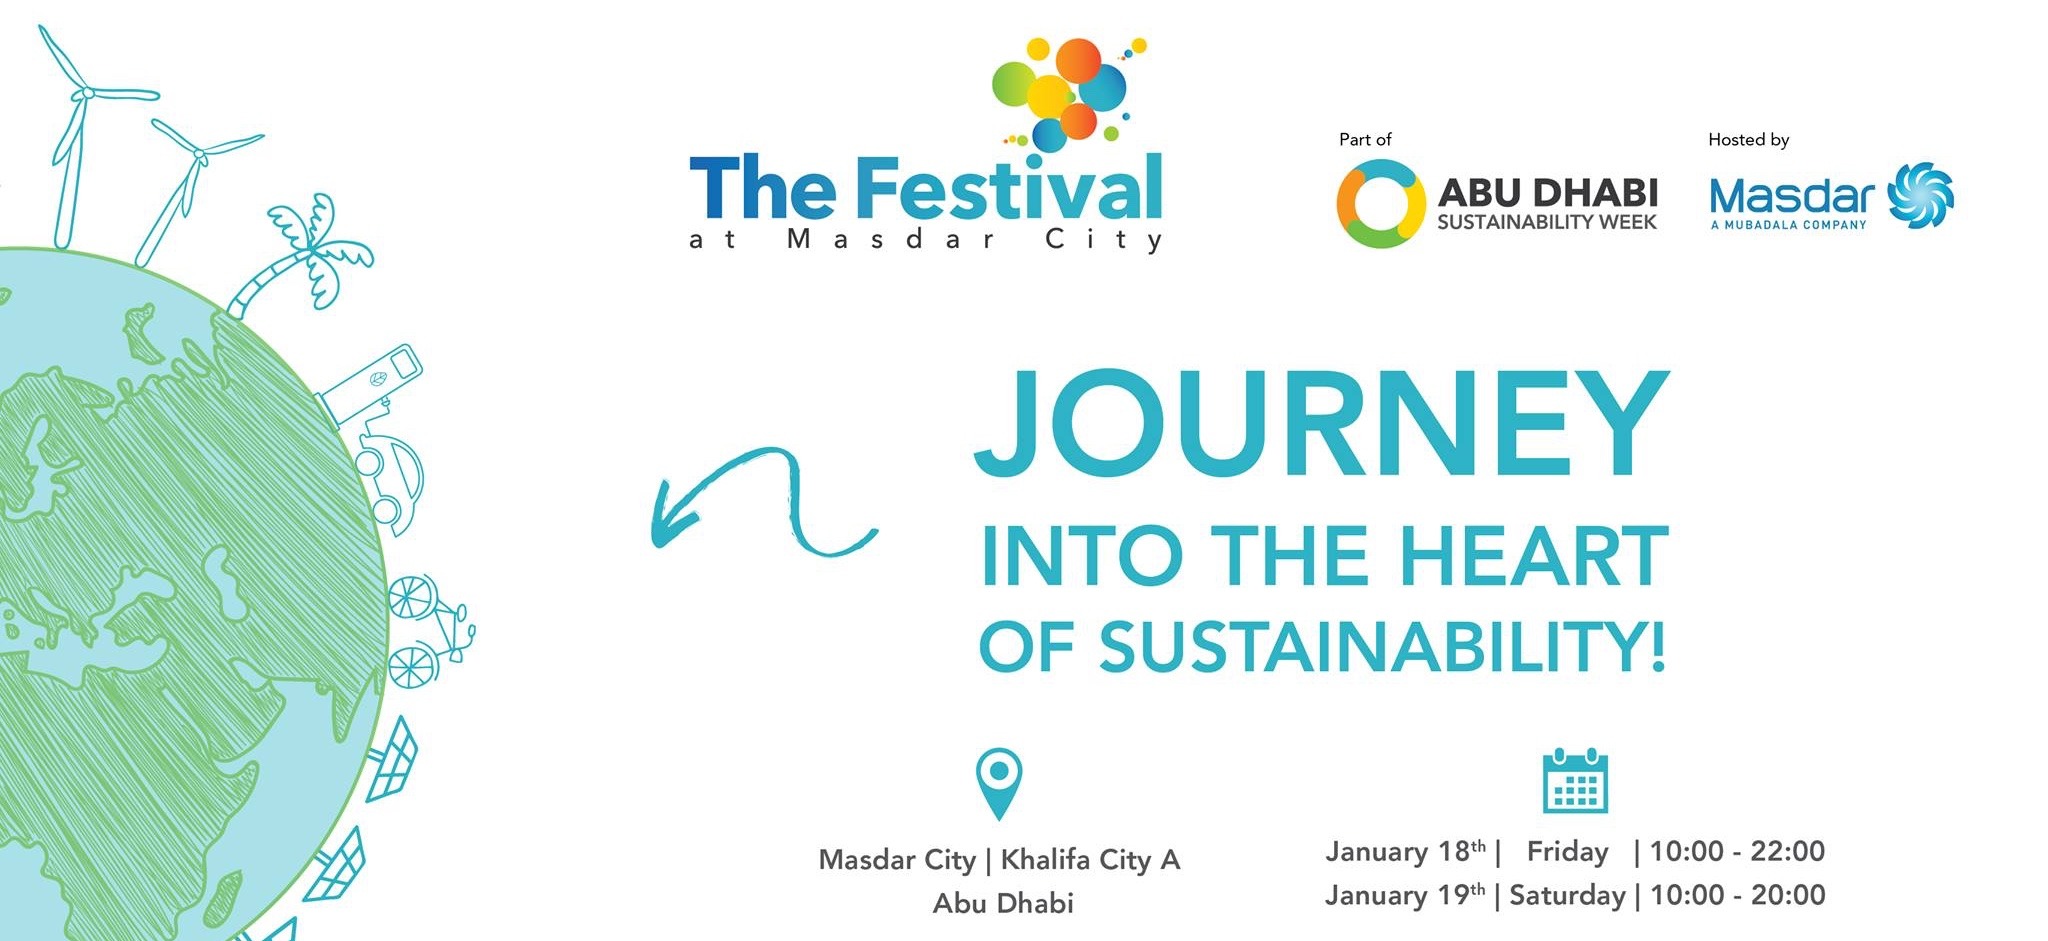 The Festival at Masdar City - Coming Soon in UAE